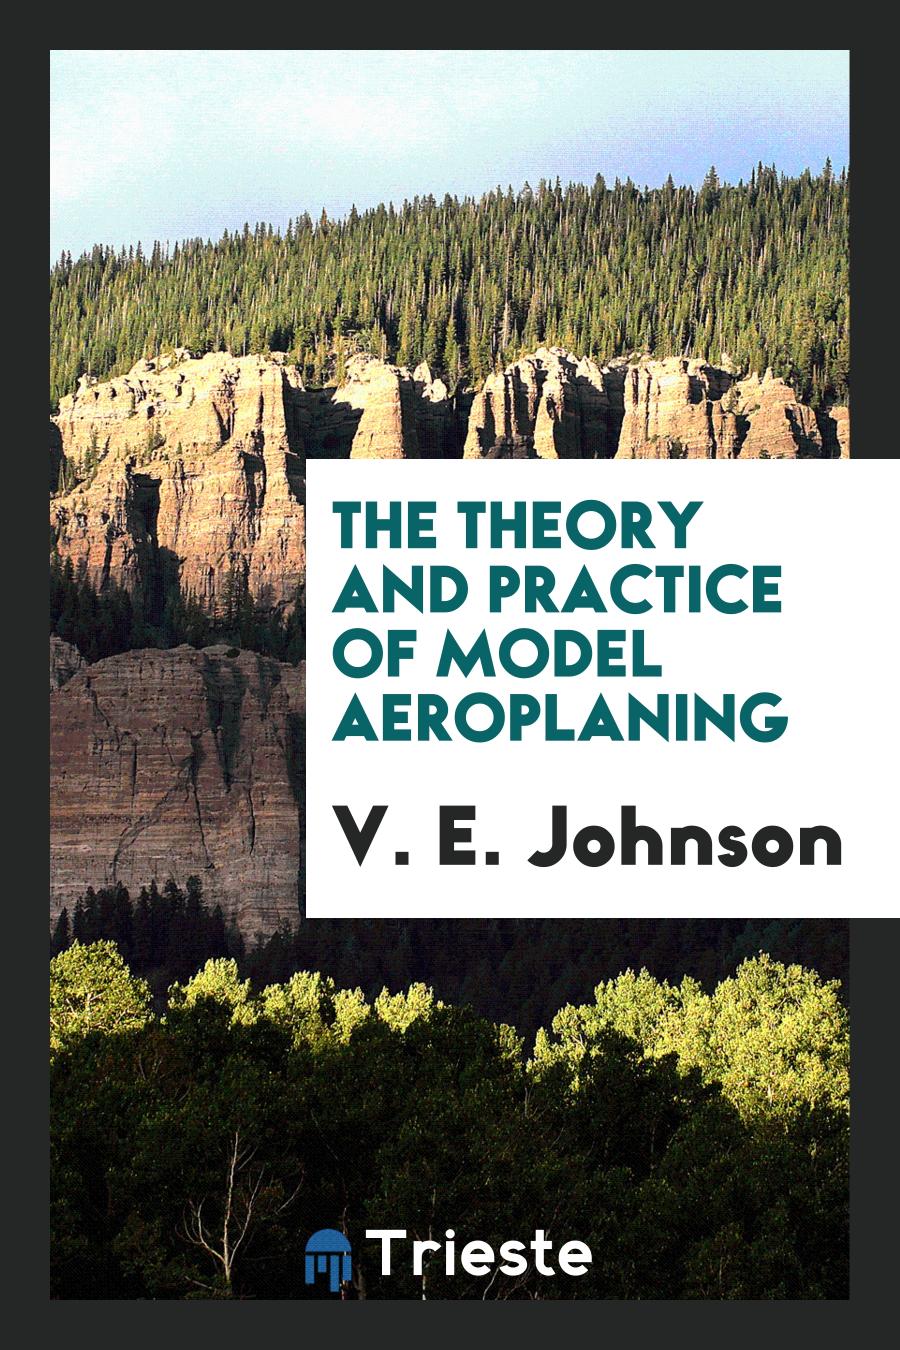 The Theory and Practice of Model Aeroplaning